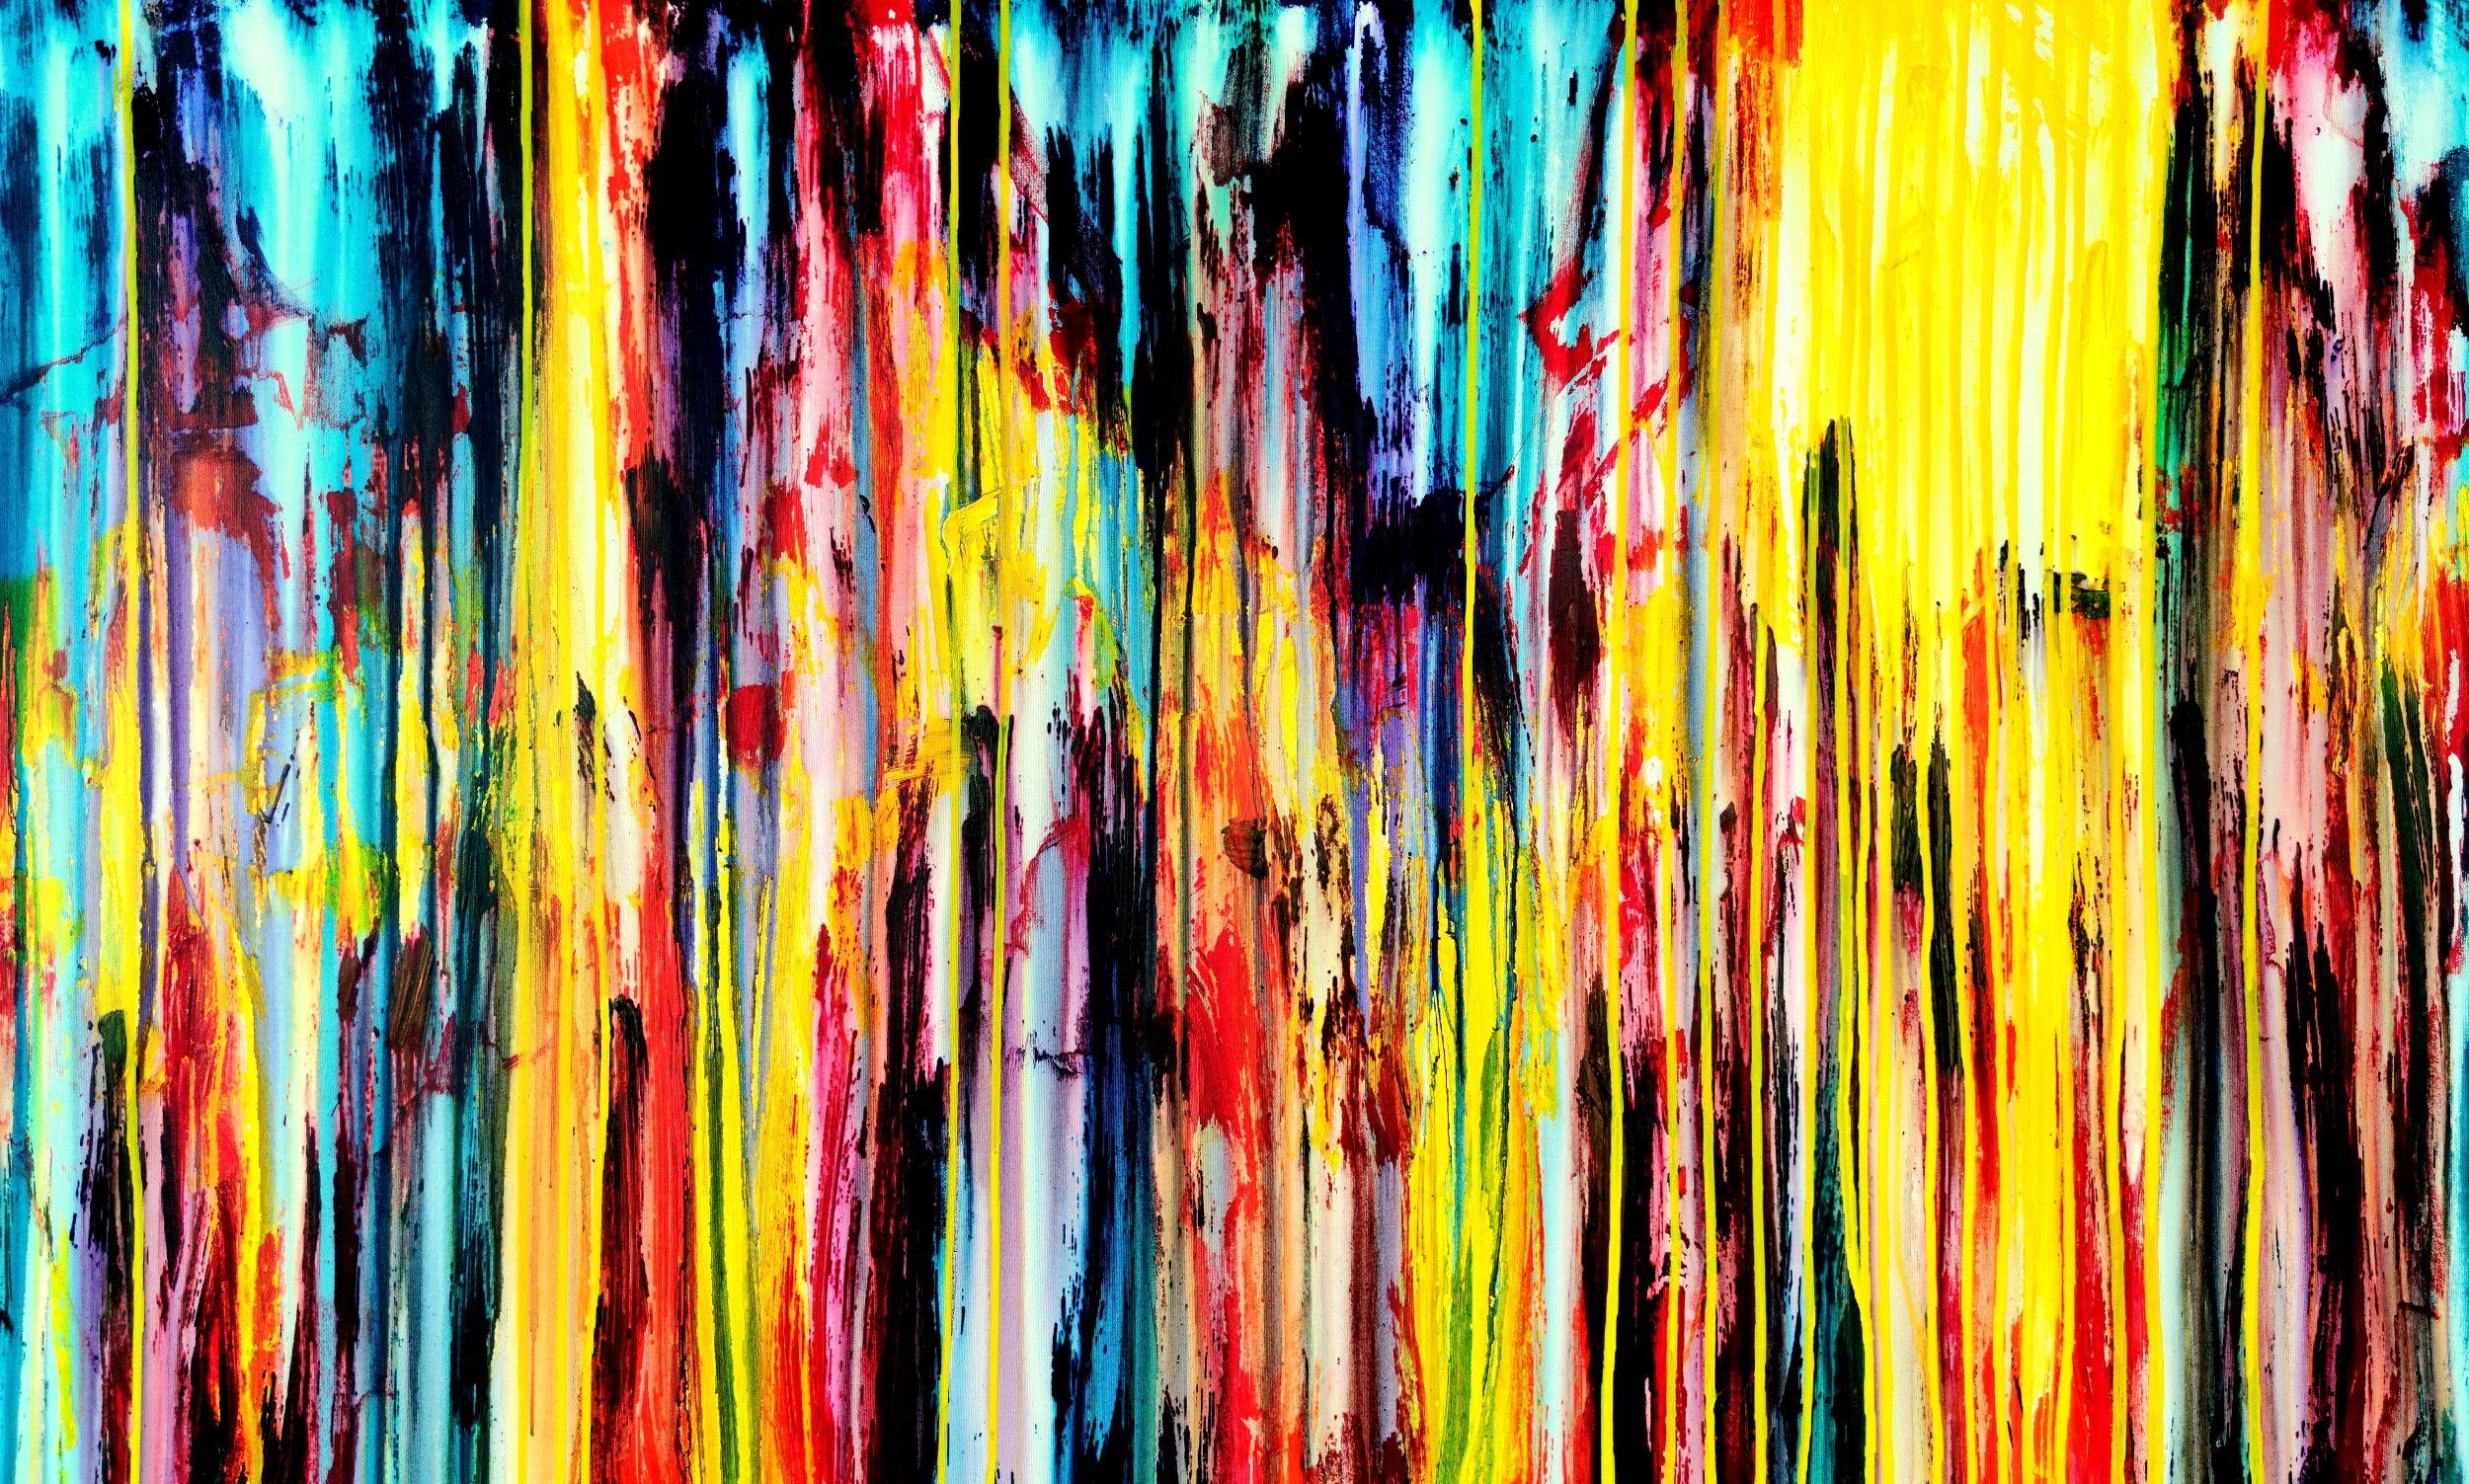 Carla Sá Fernandes Abstract Painting - The Emotional Creation #308, Painting, Acrylic on Canvas